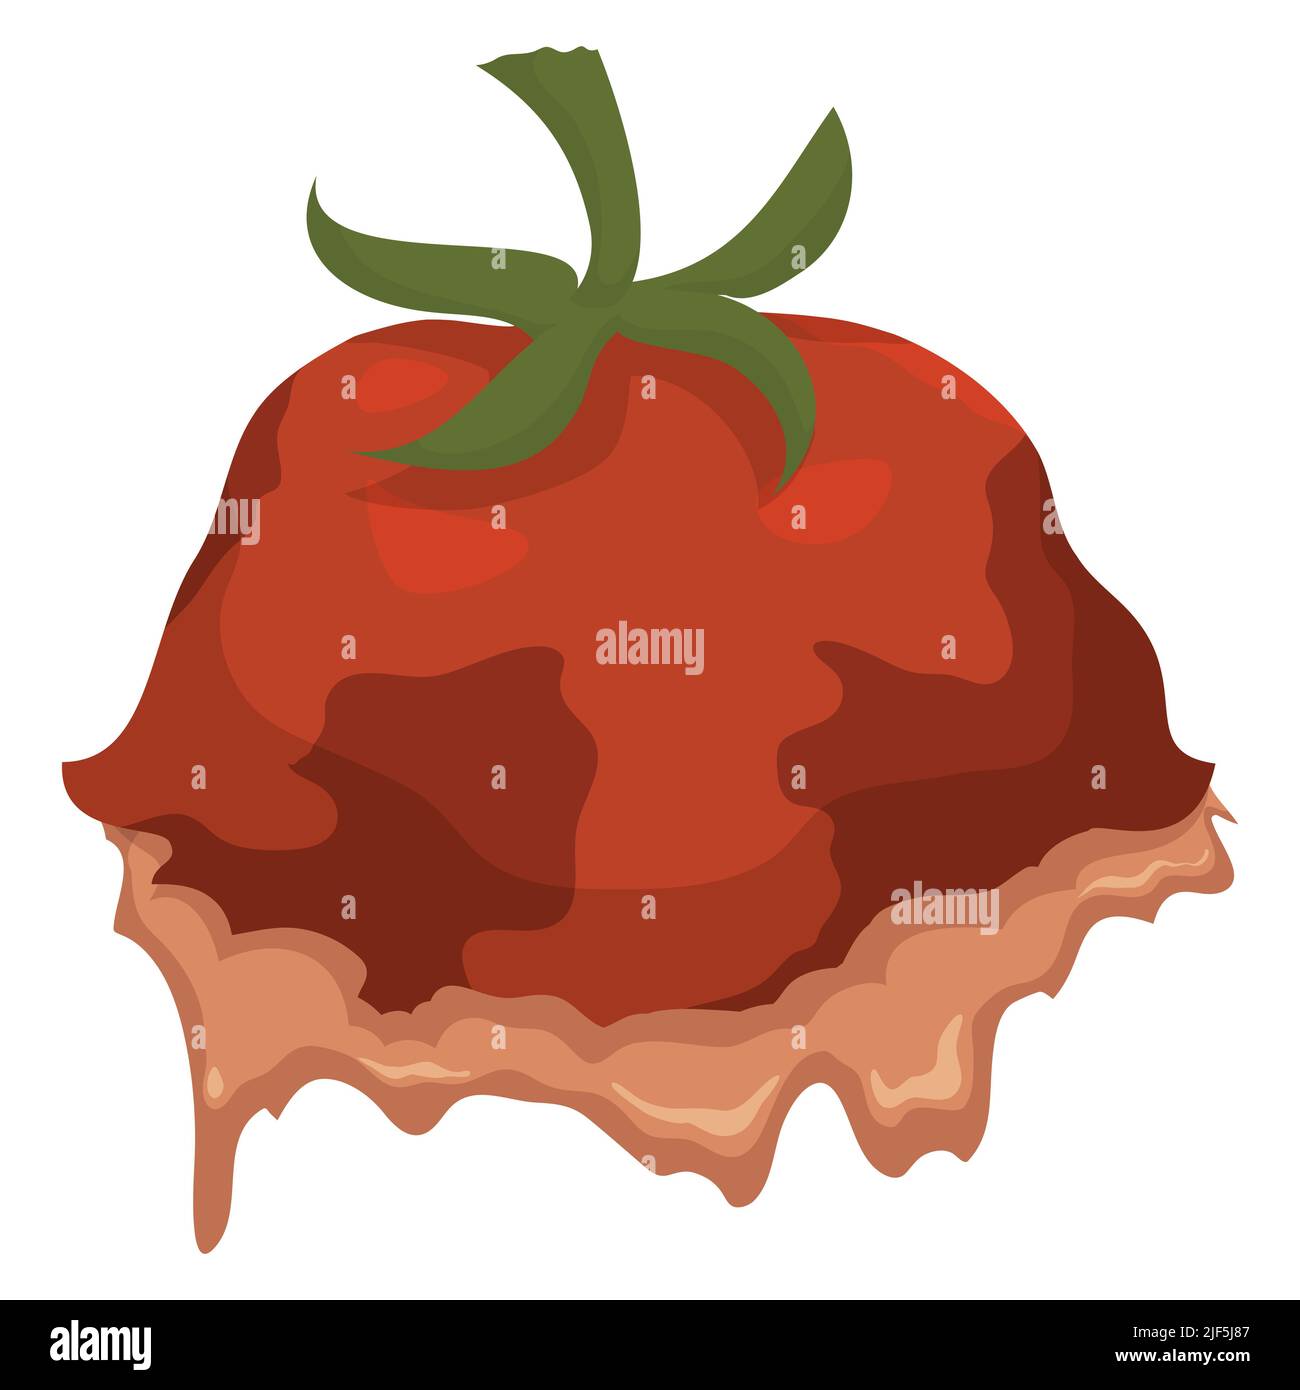 Isolated rotten tomato with stem spilling foul-smelling juice. Design in cartoon style over white background. Stock Vector